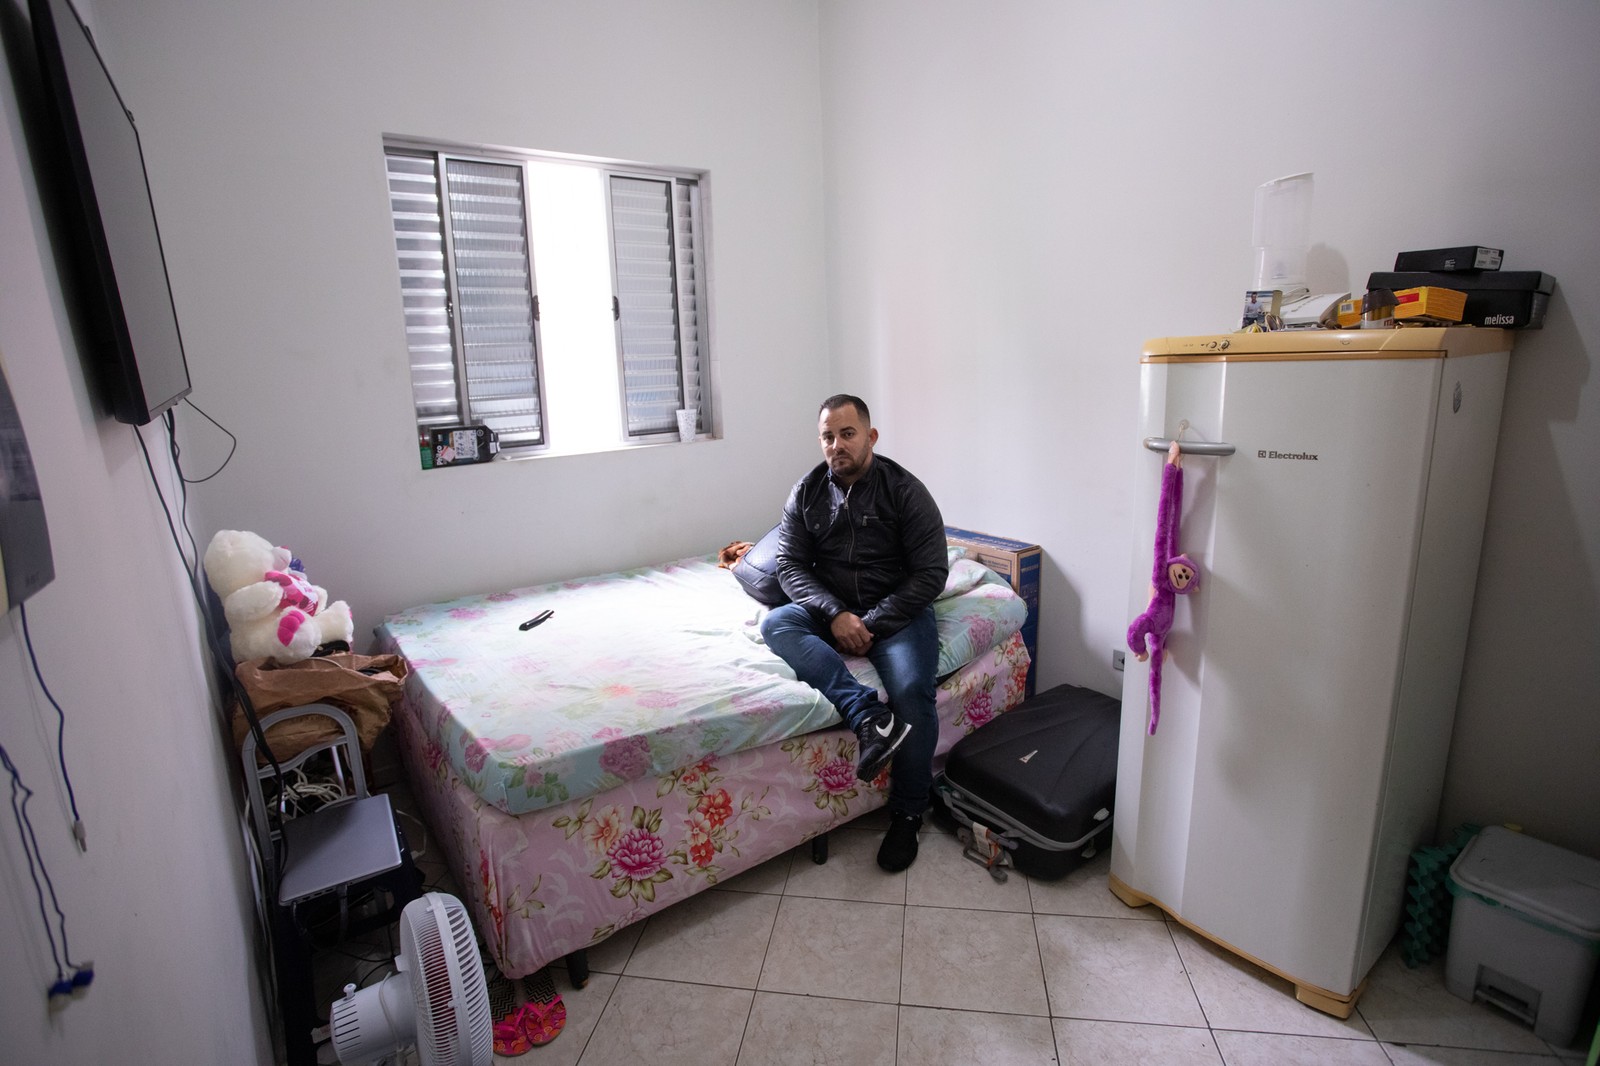 Cuban Doctor Karel Sanchez Fuentes lives with his wife in a small studio apartment in the center of São Paulo.